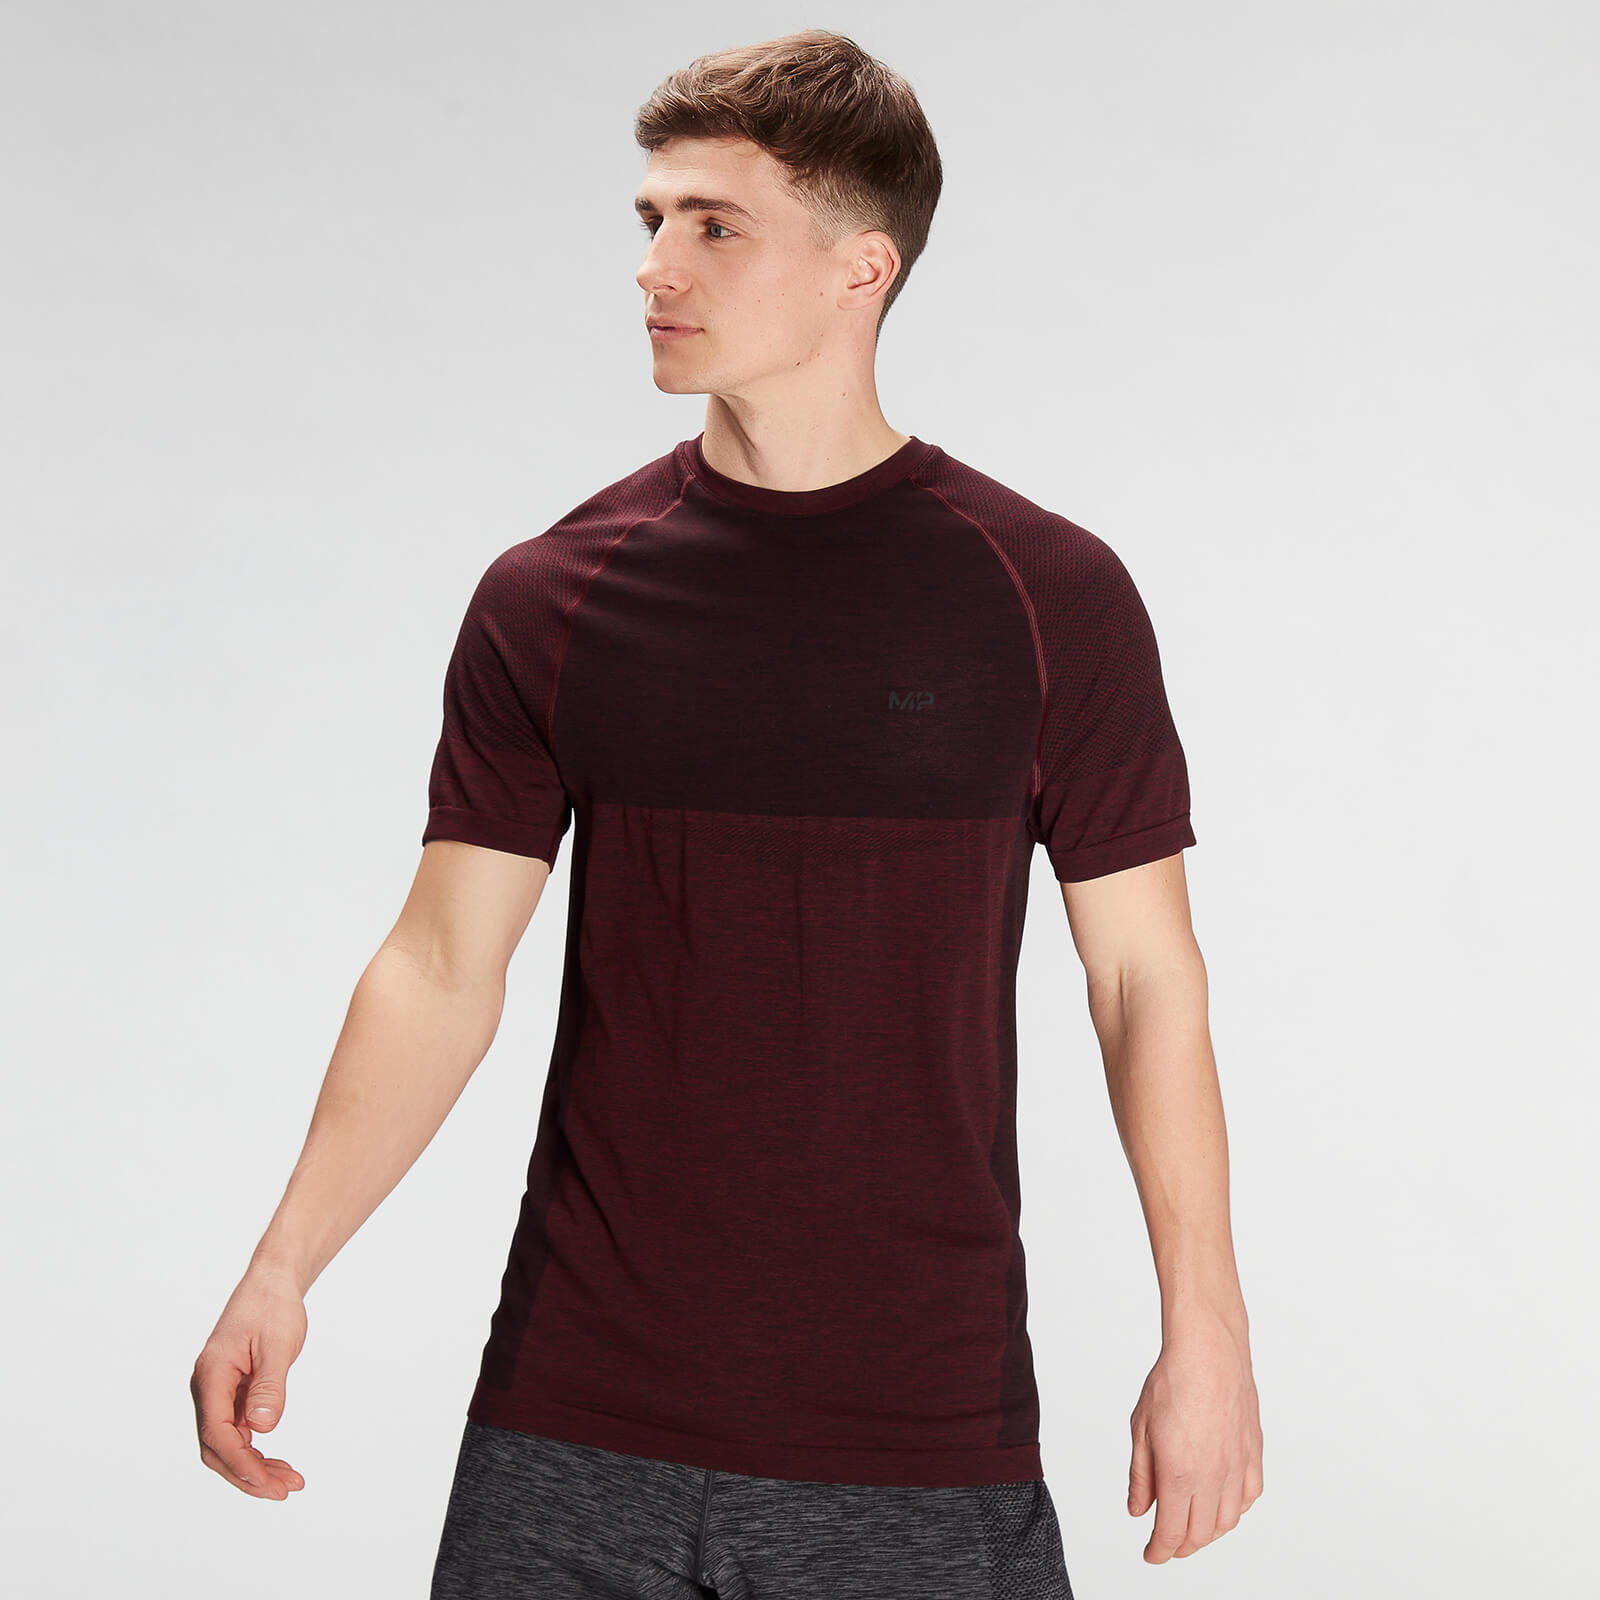 MP Men's Essential Seamless Short Sleeve T-Shirt- Washed Oxblood Marl - XS